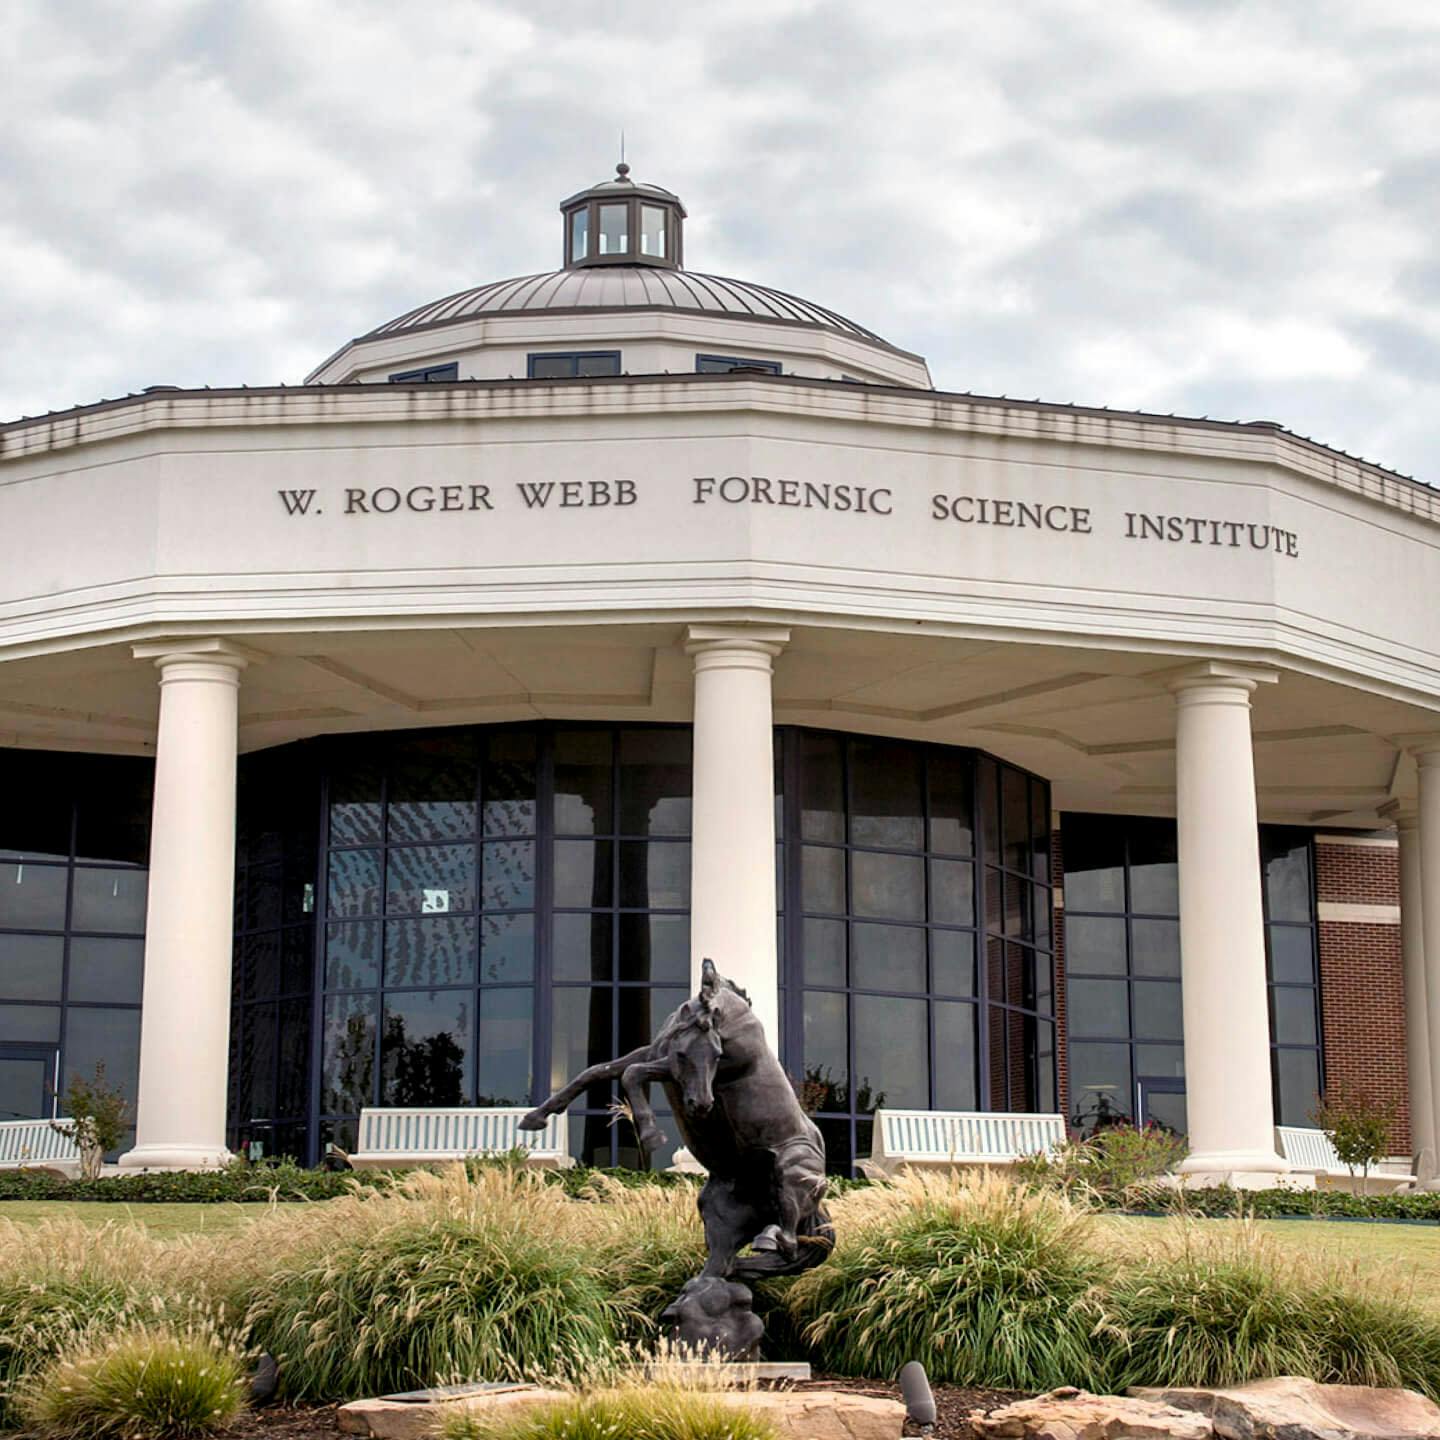 Low angle view of W. Roger Webb Forensic Science Institute